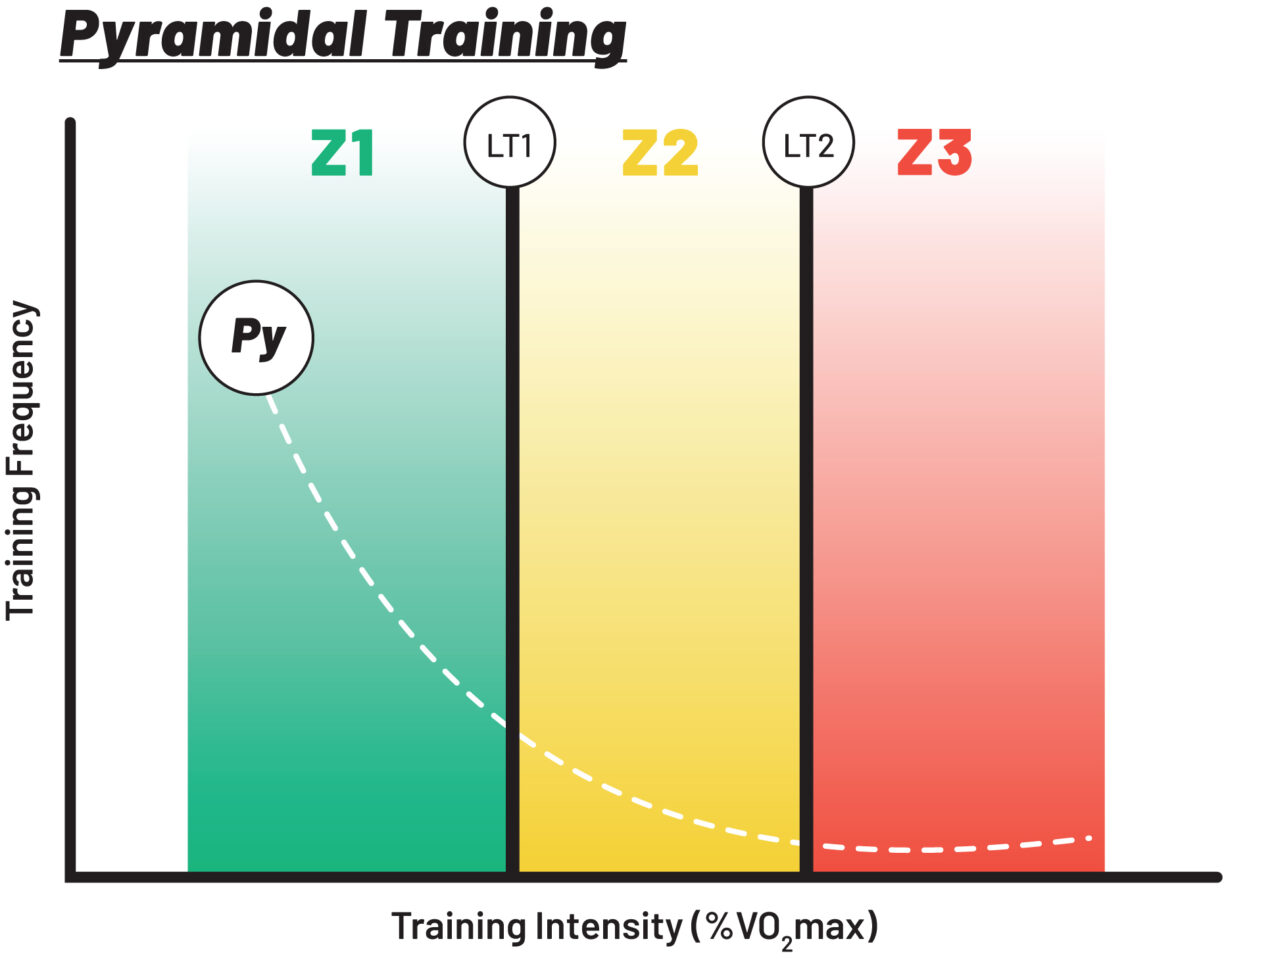 graphic portrayal of intensity distribution across 3 zones for pyramidal training